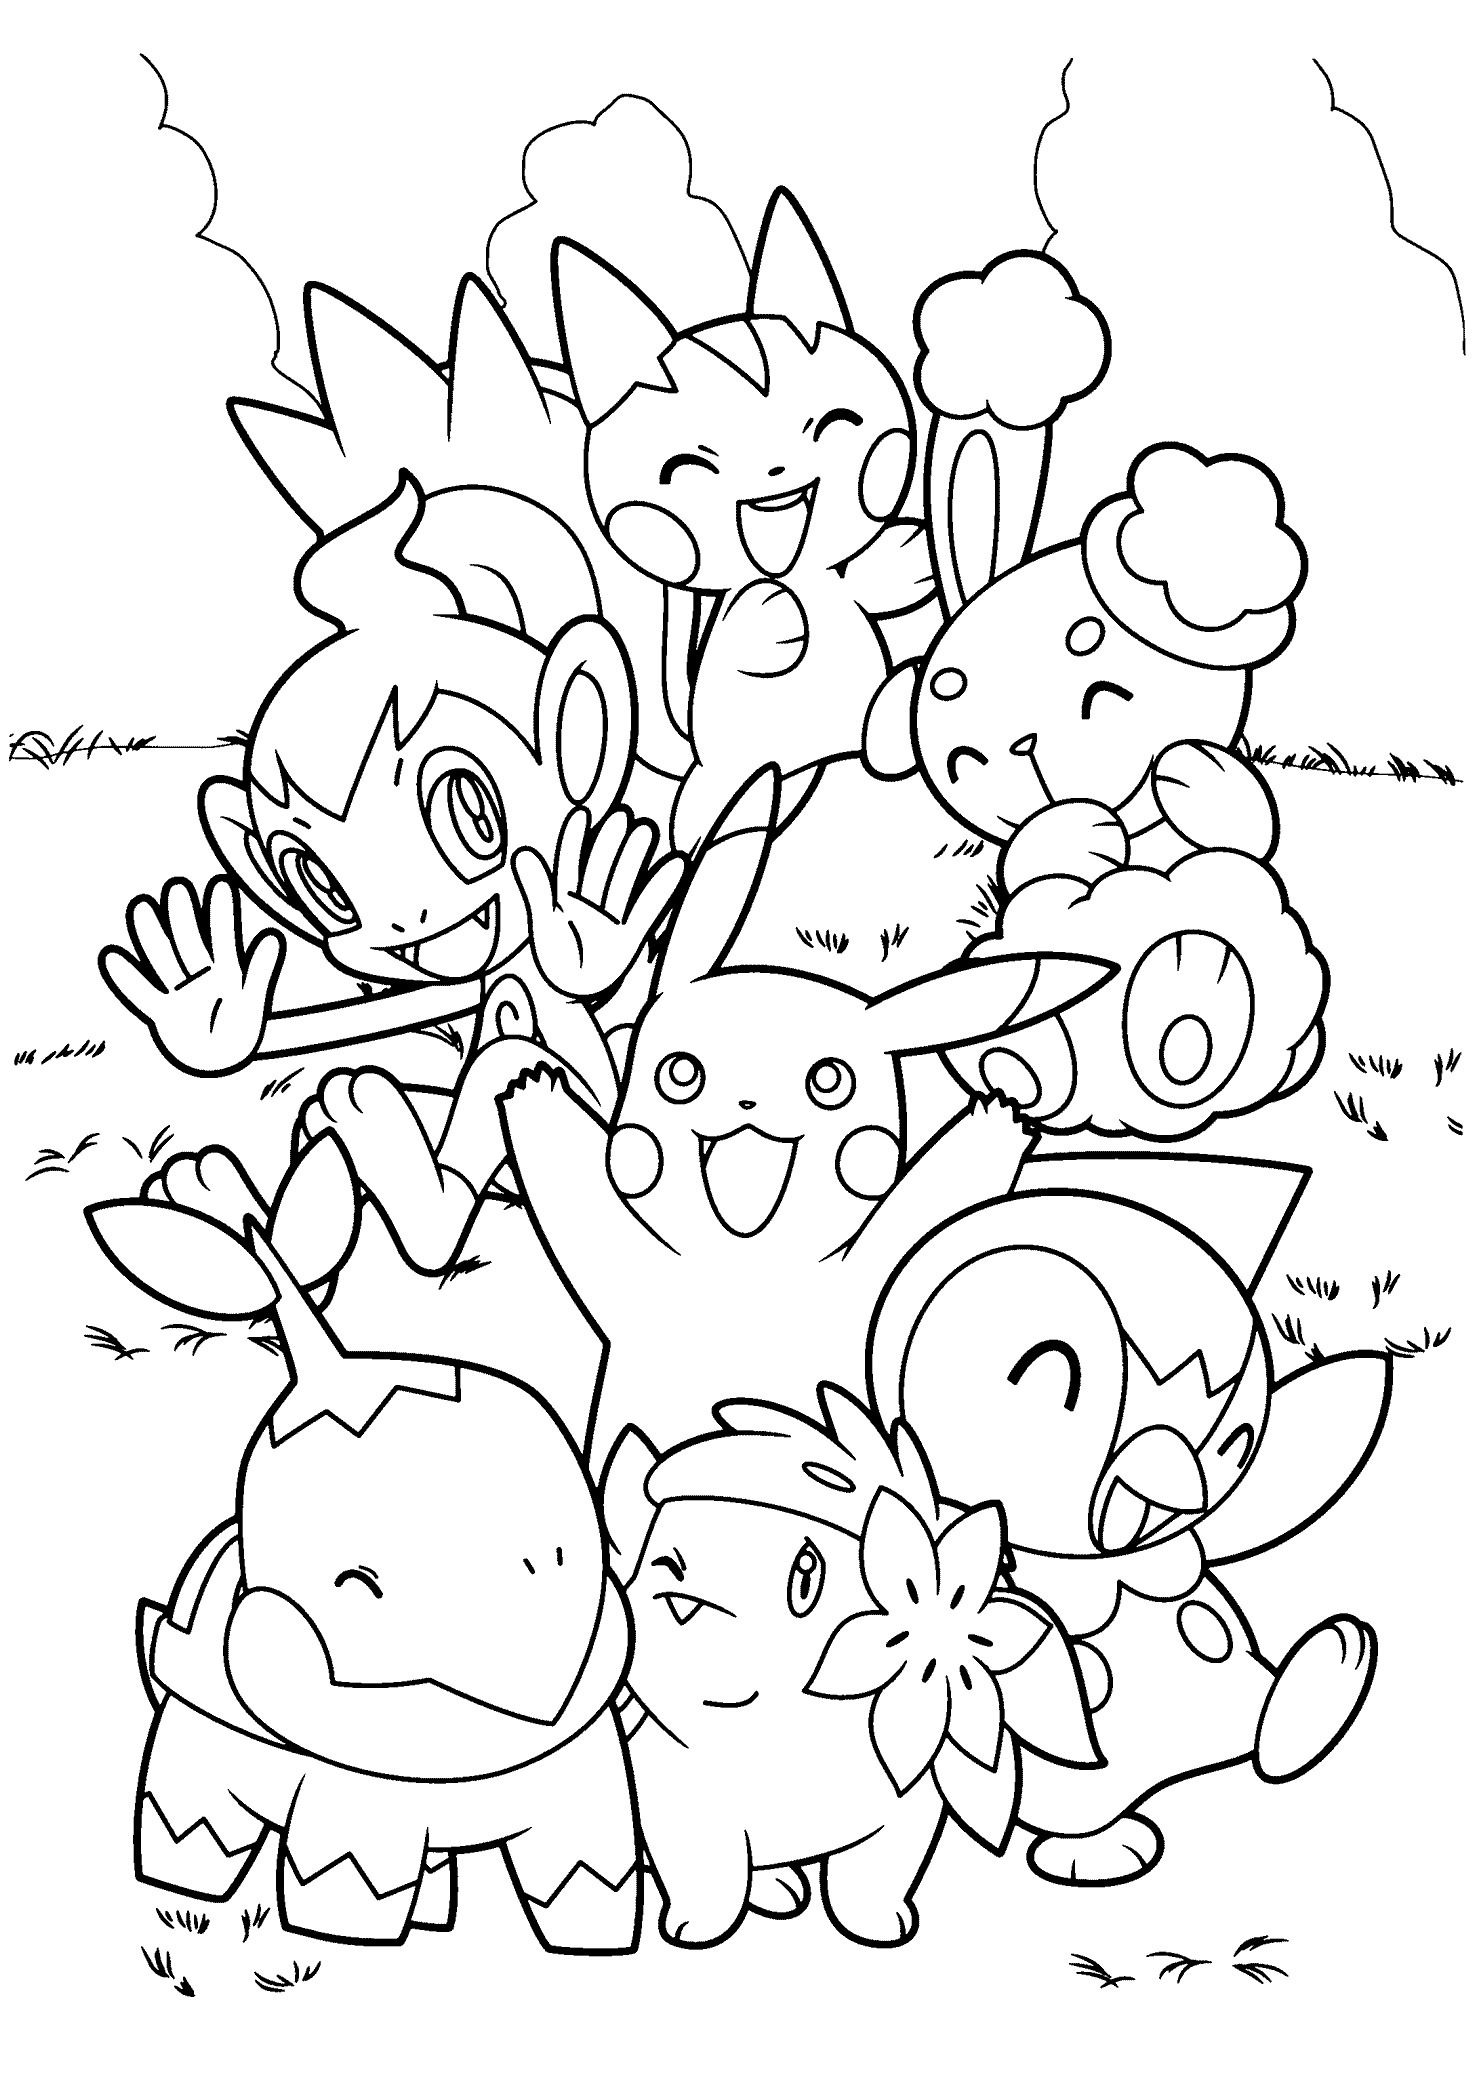 Pokemon Colouring Book for Adults